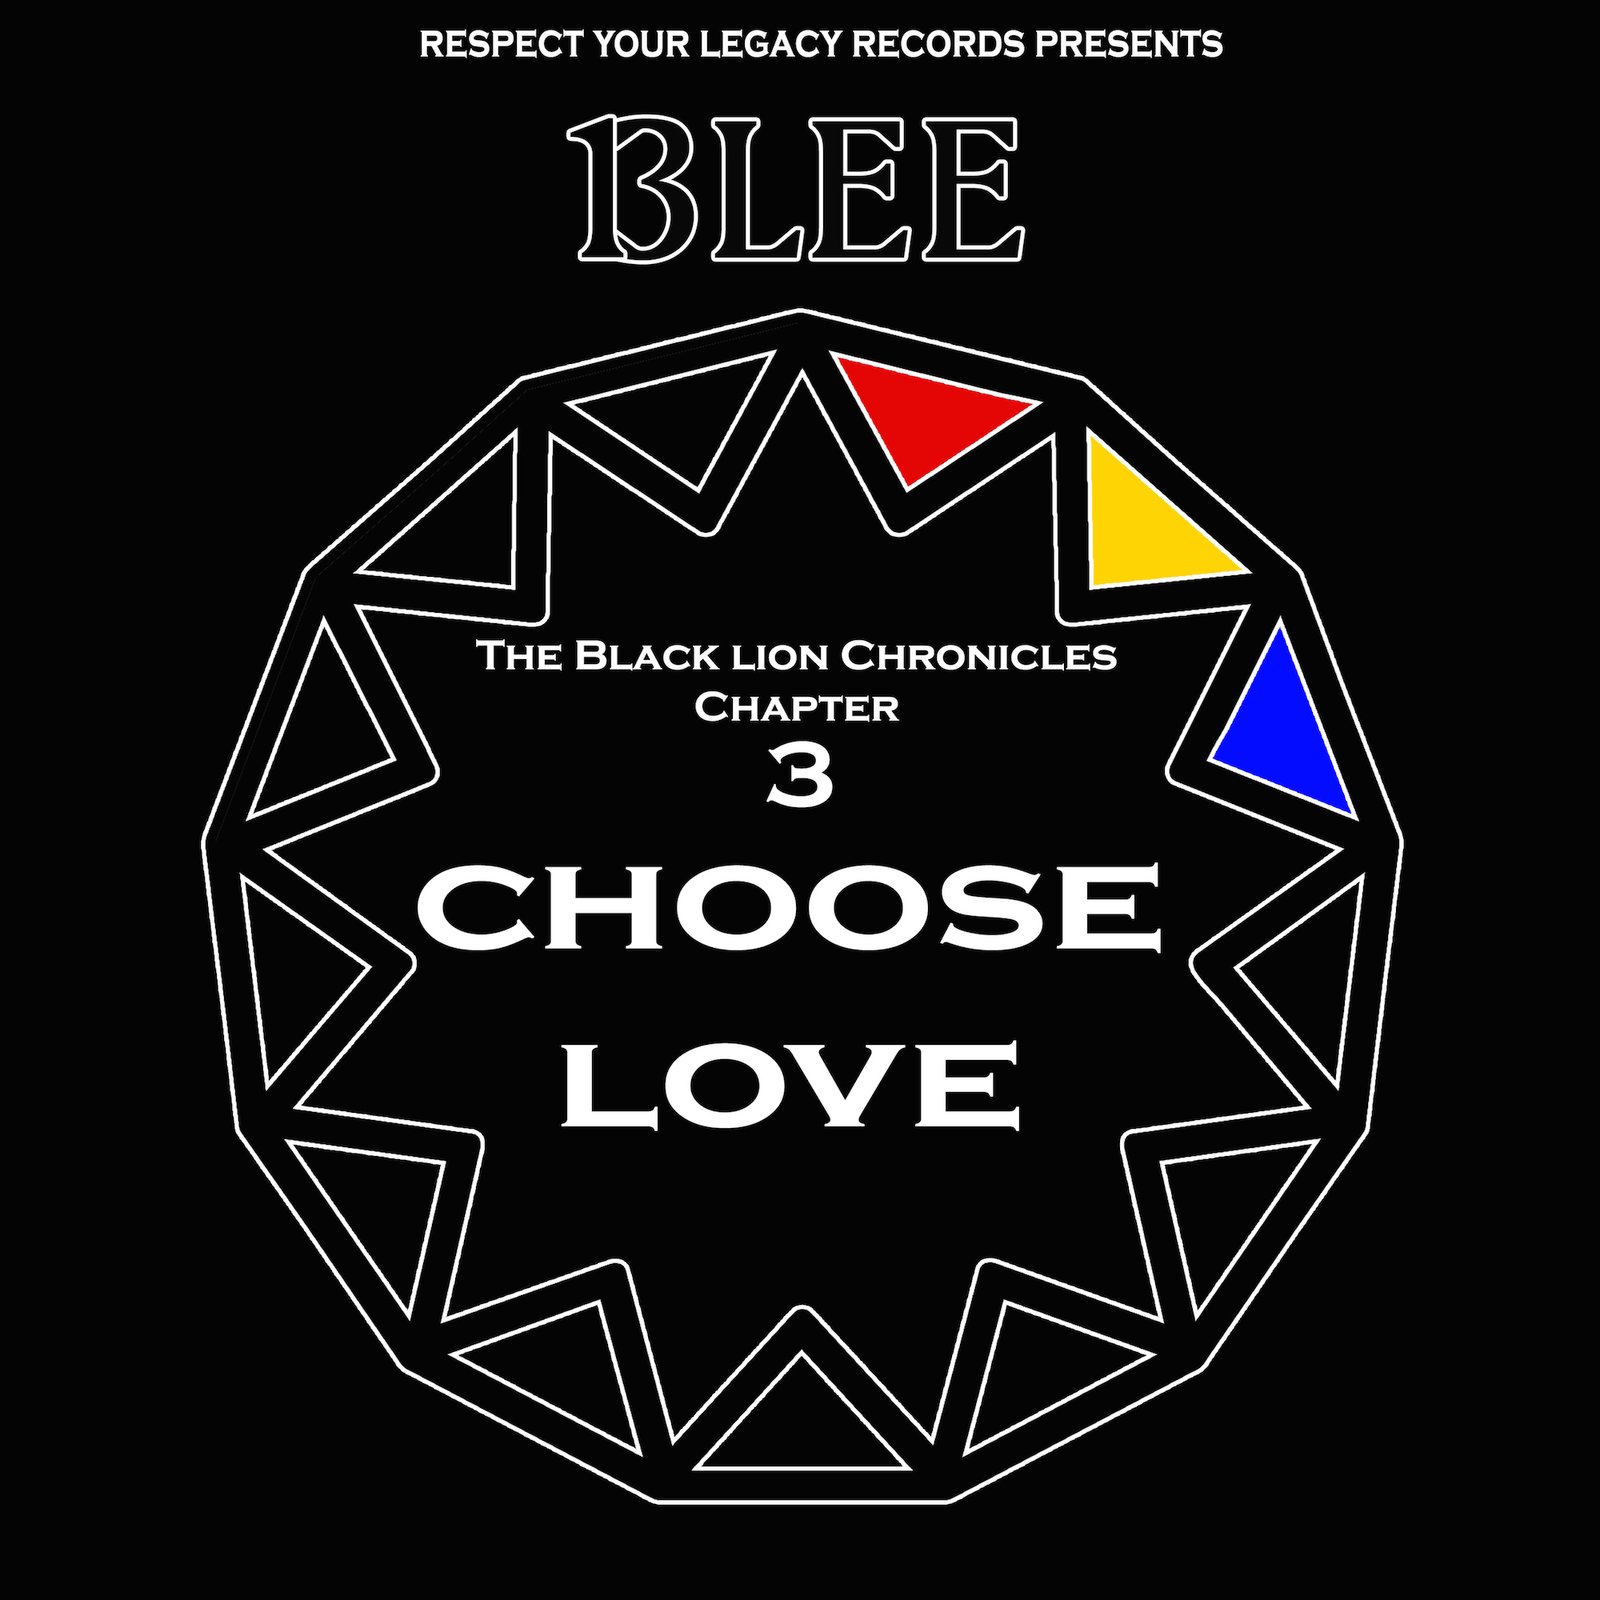 The Black Lion Chronicles Chapter 3: Choose Love